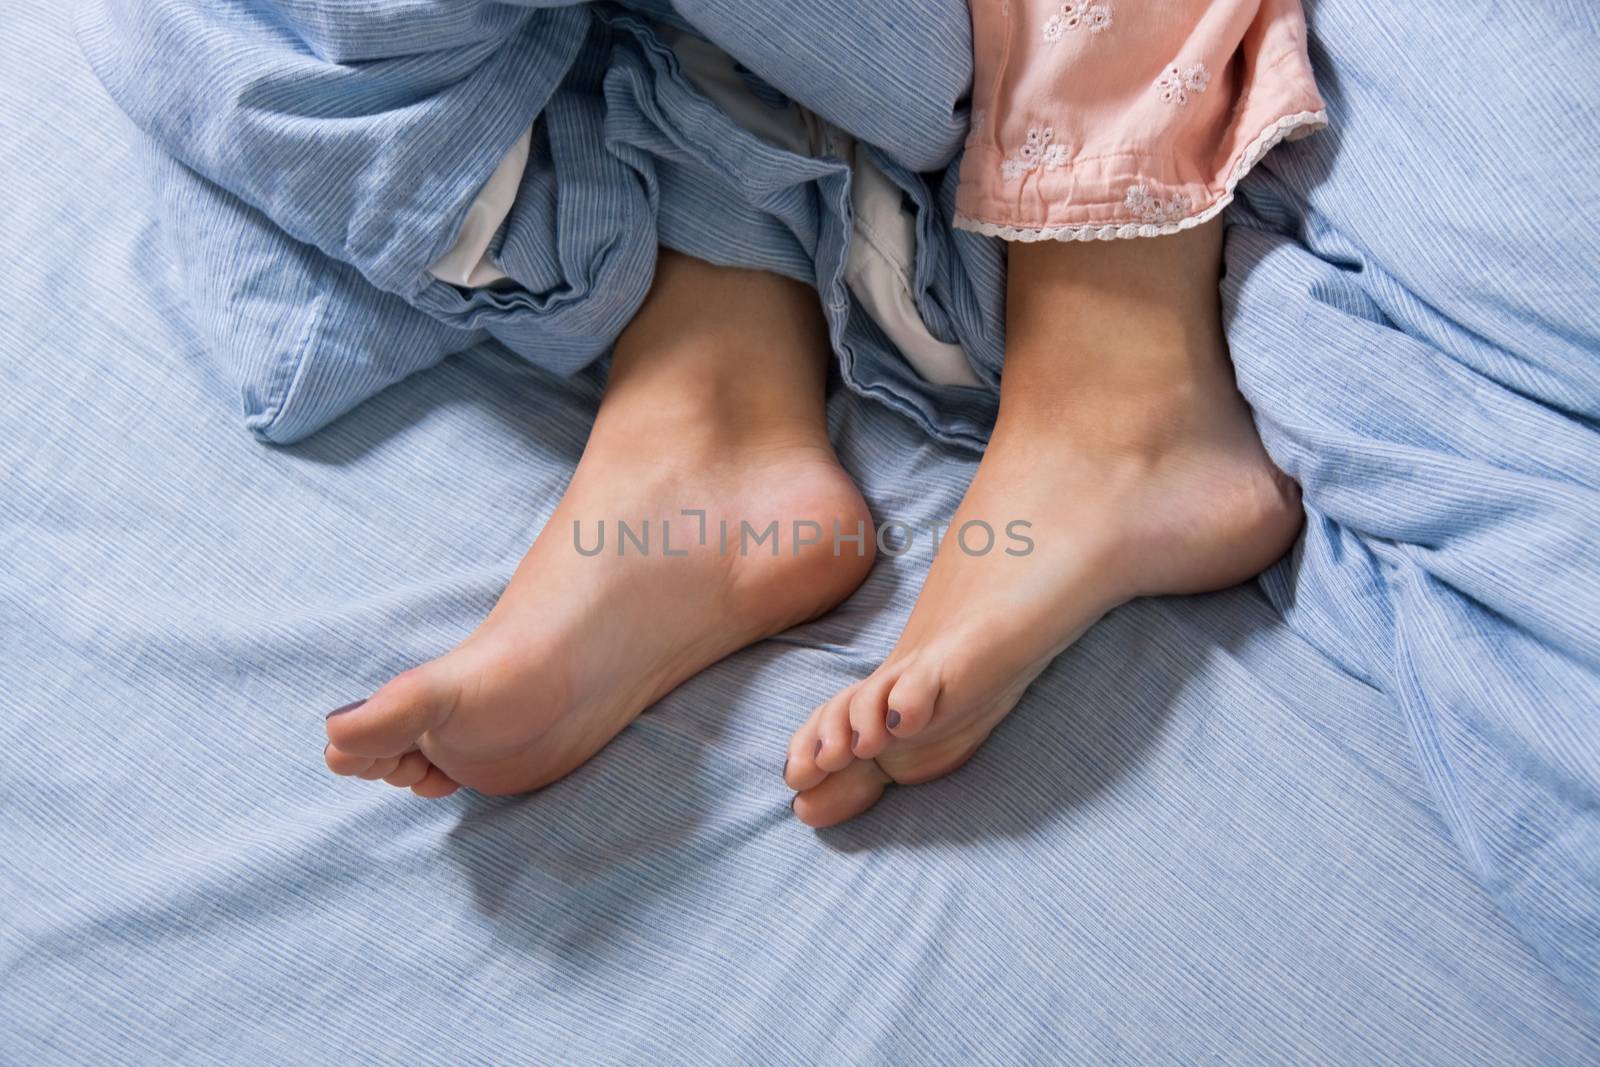 Close up Bare Feet of a Young Woman Lying Down on a Blue Bed, Captured in High Angle View.